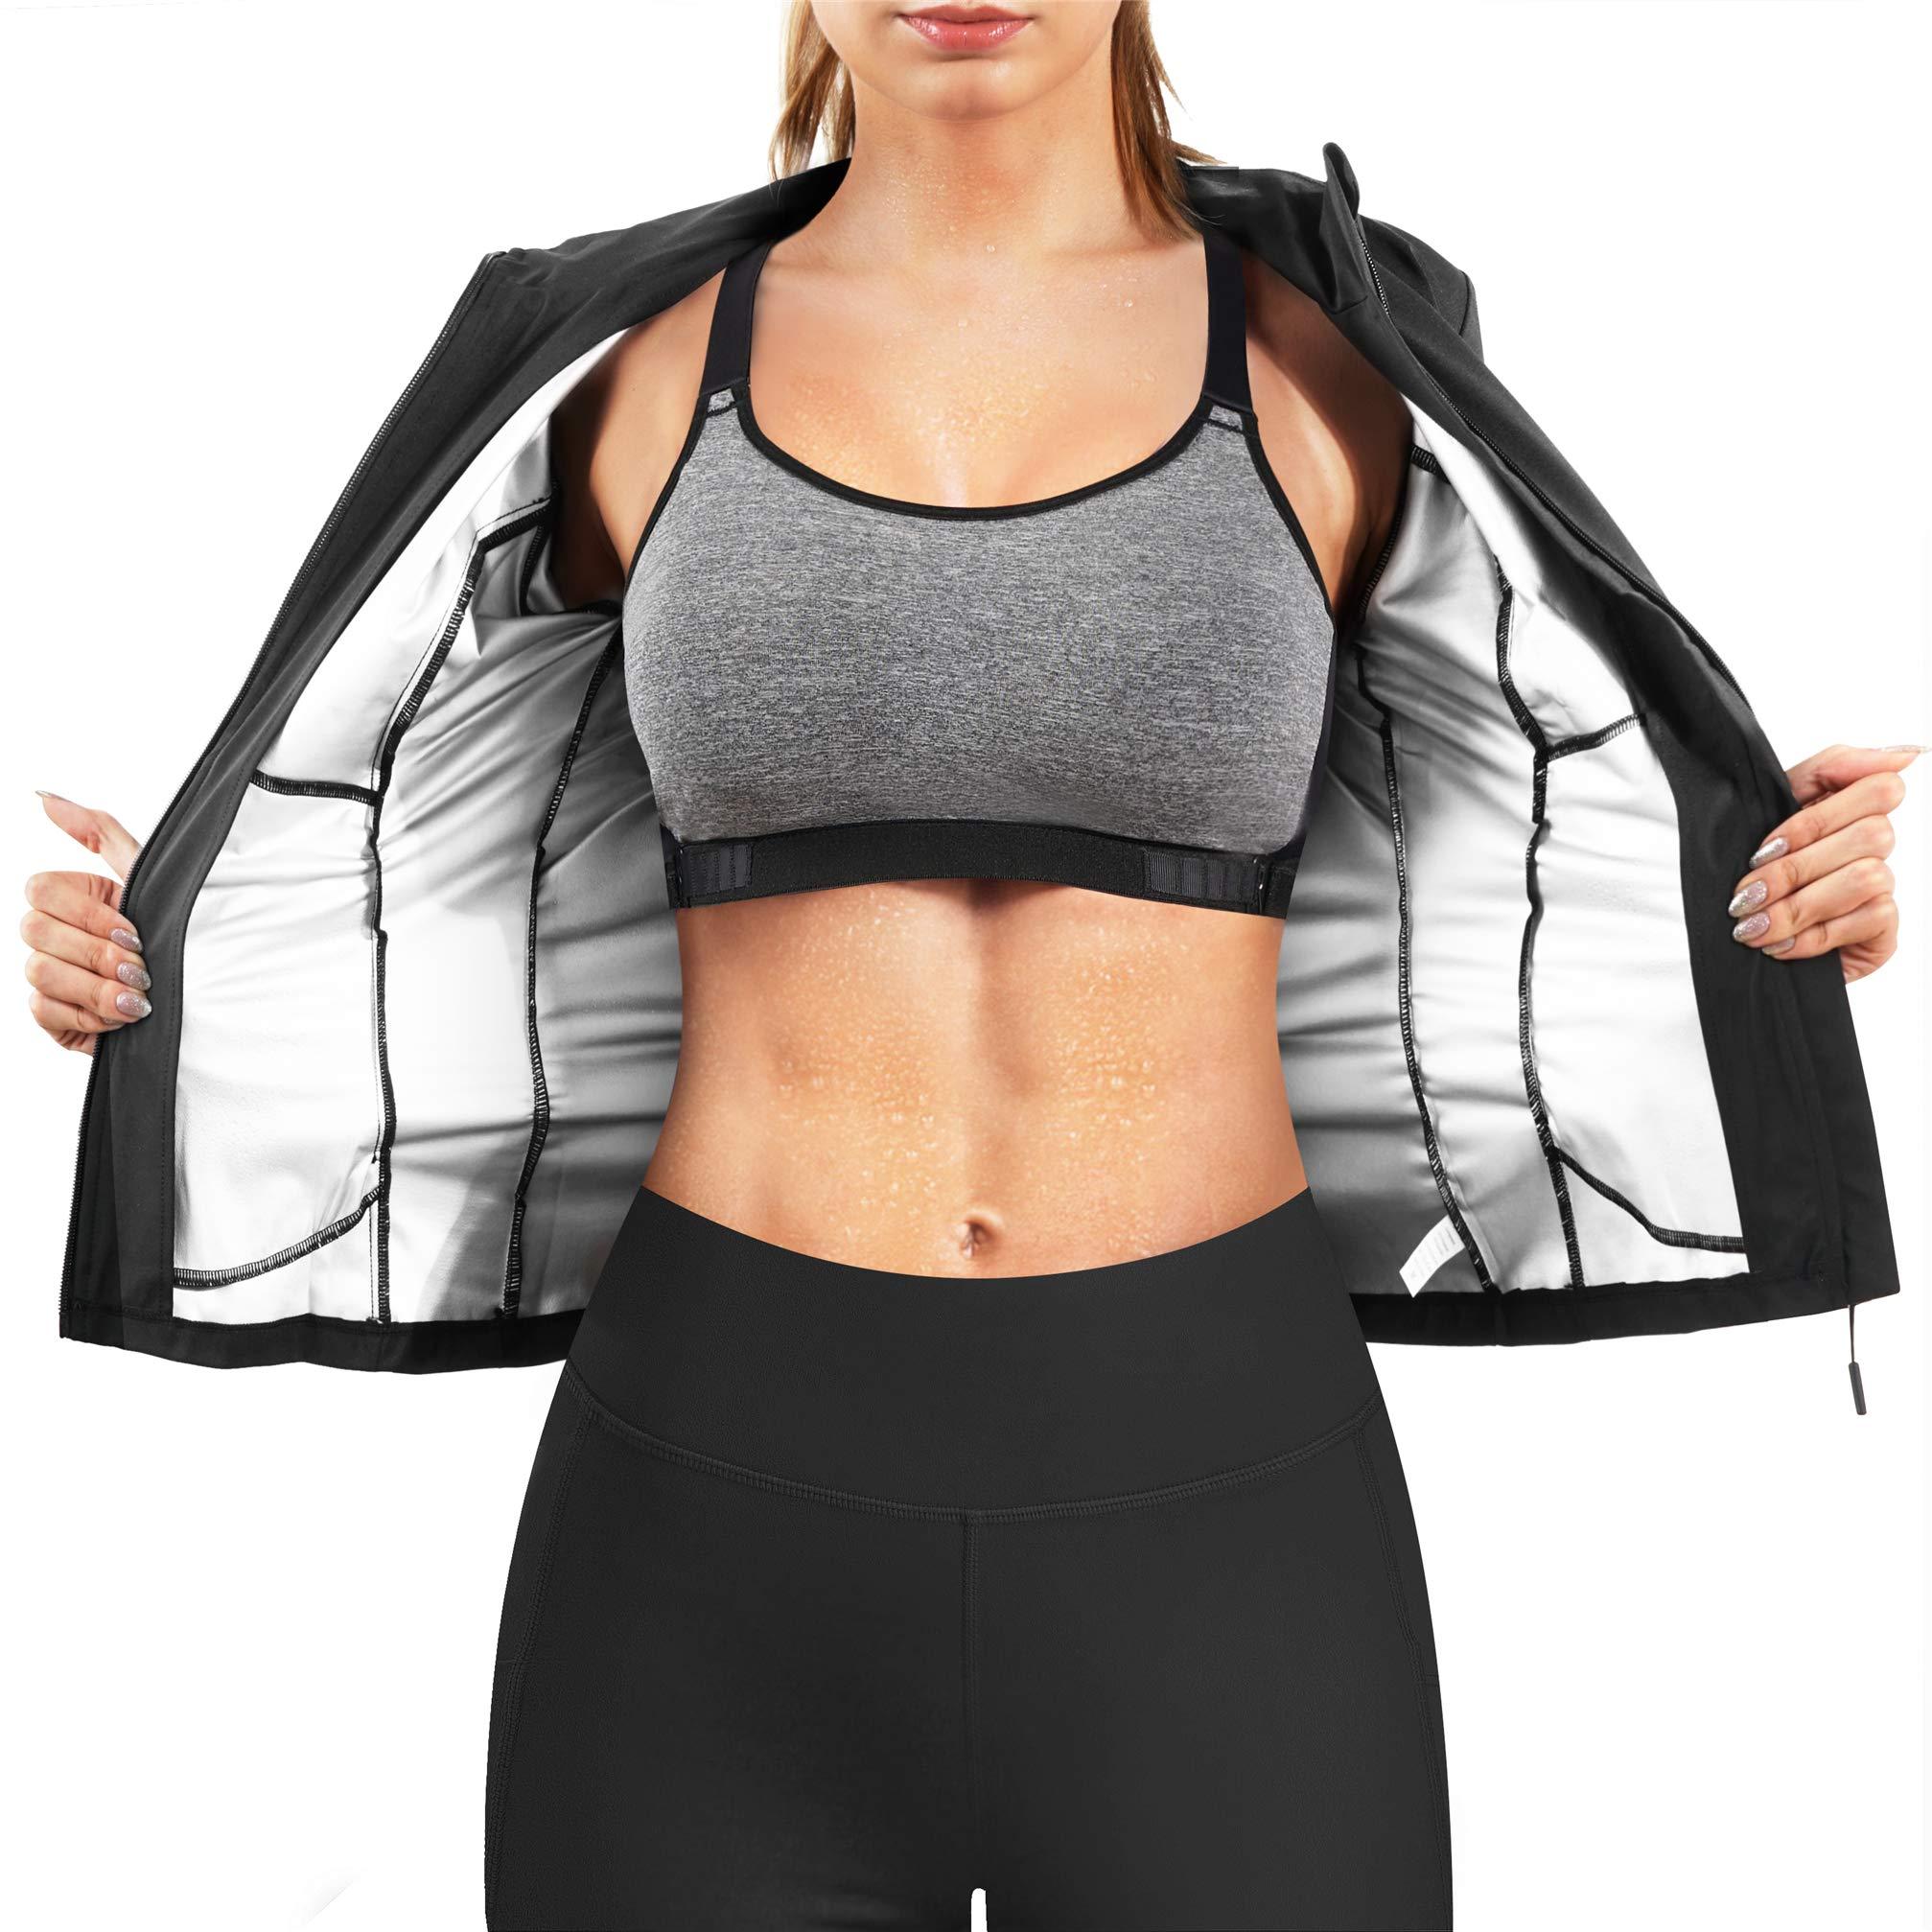 Chumian Women Hot Sweat Sauna Suit Track Jackets Workout Long Sleeve Tank Tops with Zipper Slimming Polymer Waist Trainer (Black, S)